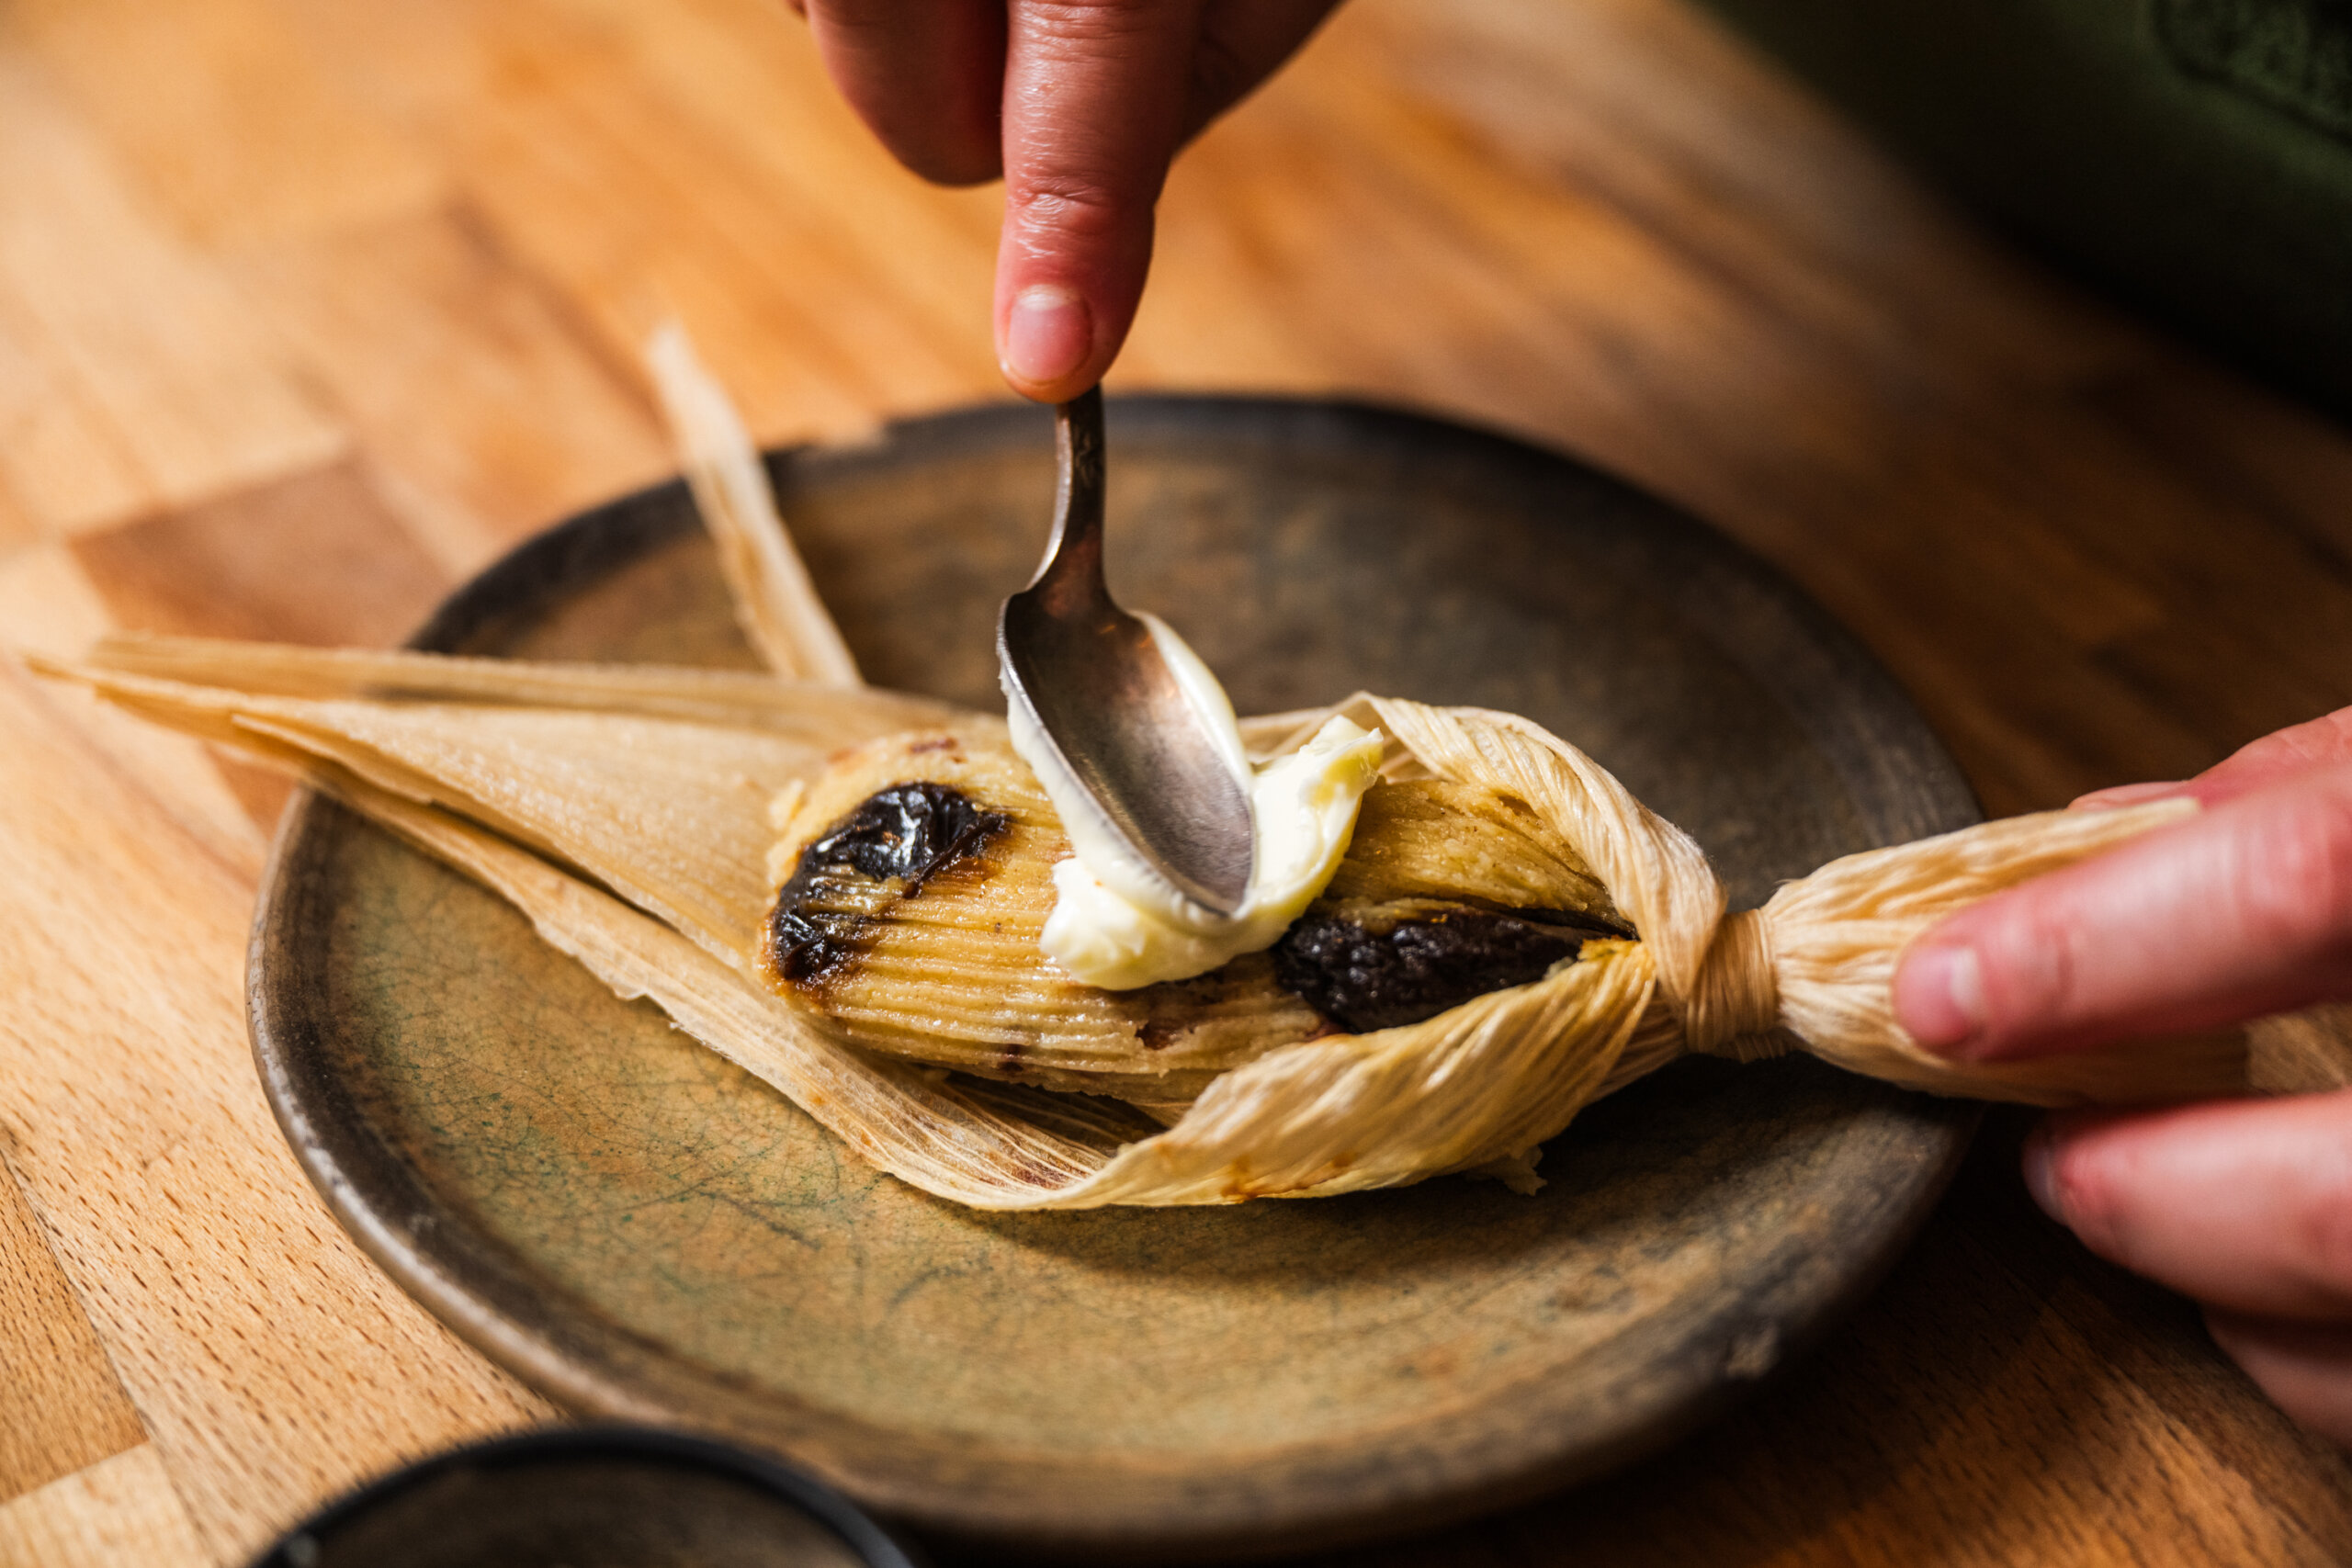 Chef Ana Castro spreads butter over a hot tamal